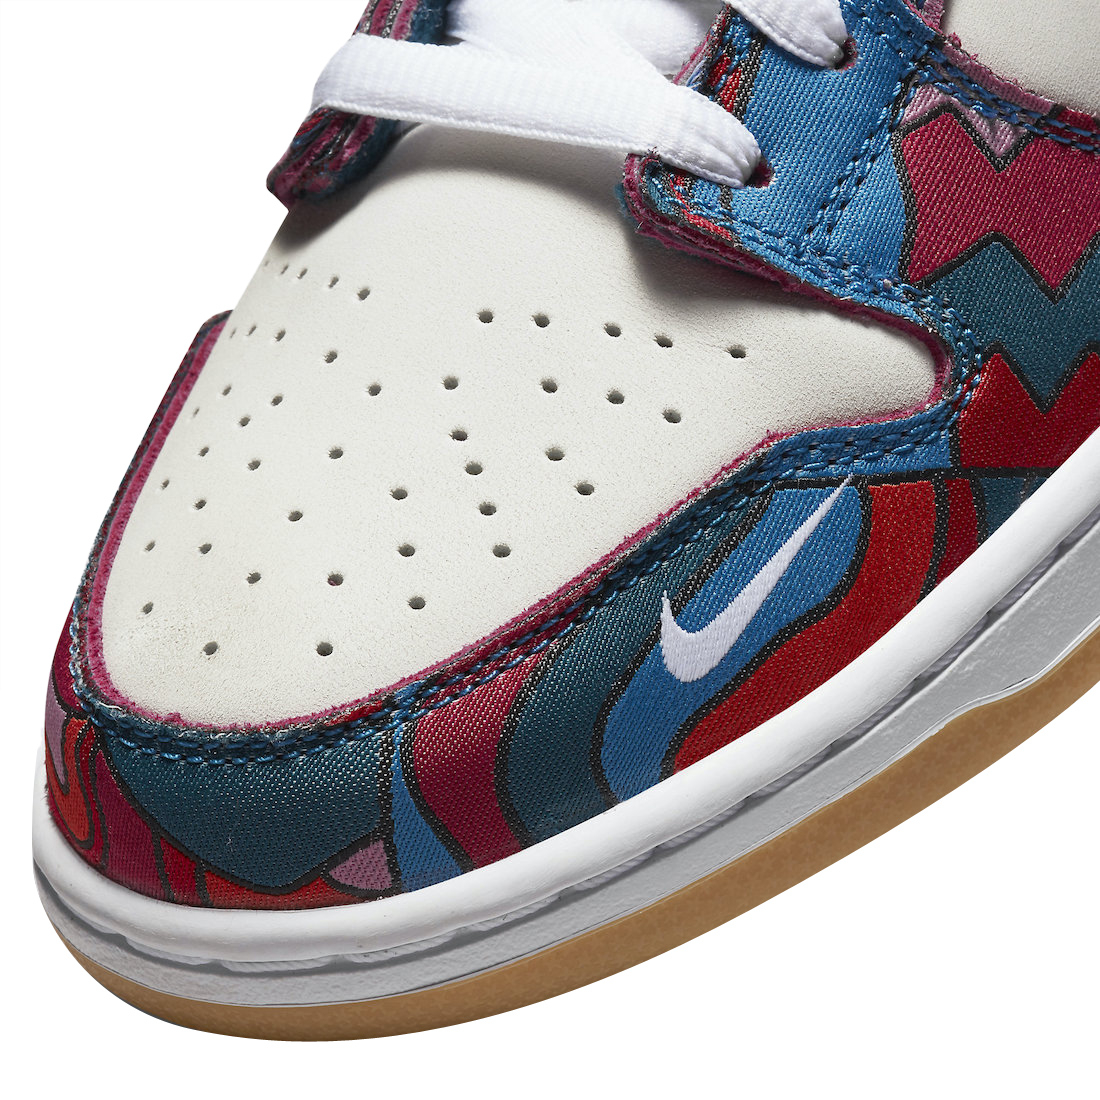 Parra x Nike SB Dunk Low Abstract Art DH7695-600